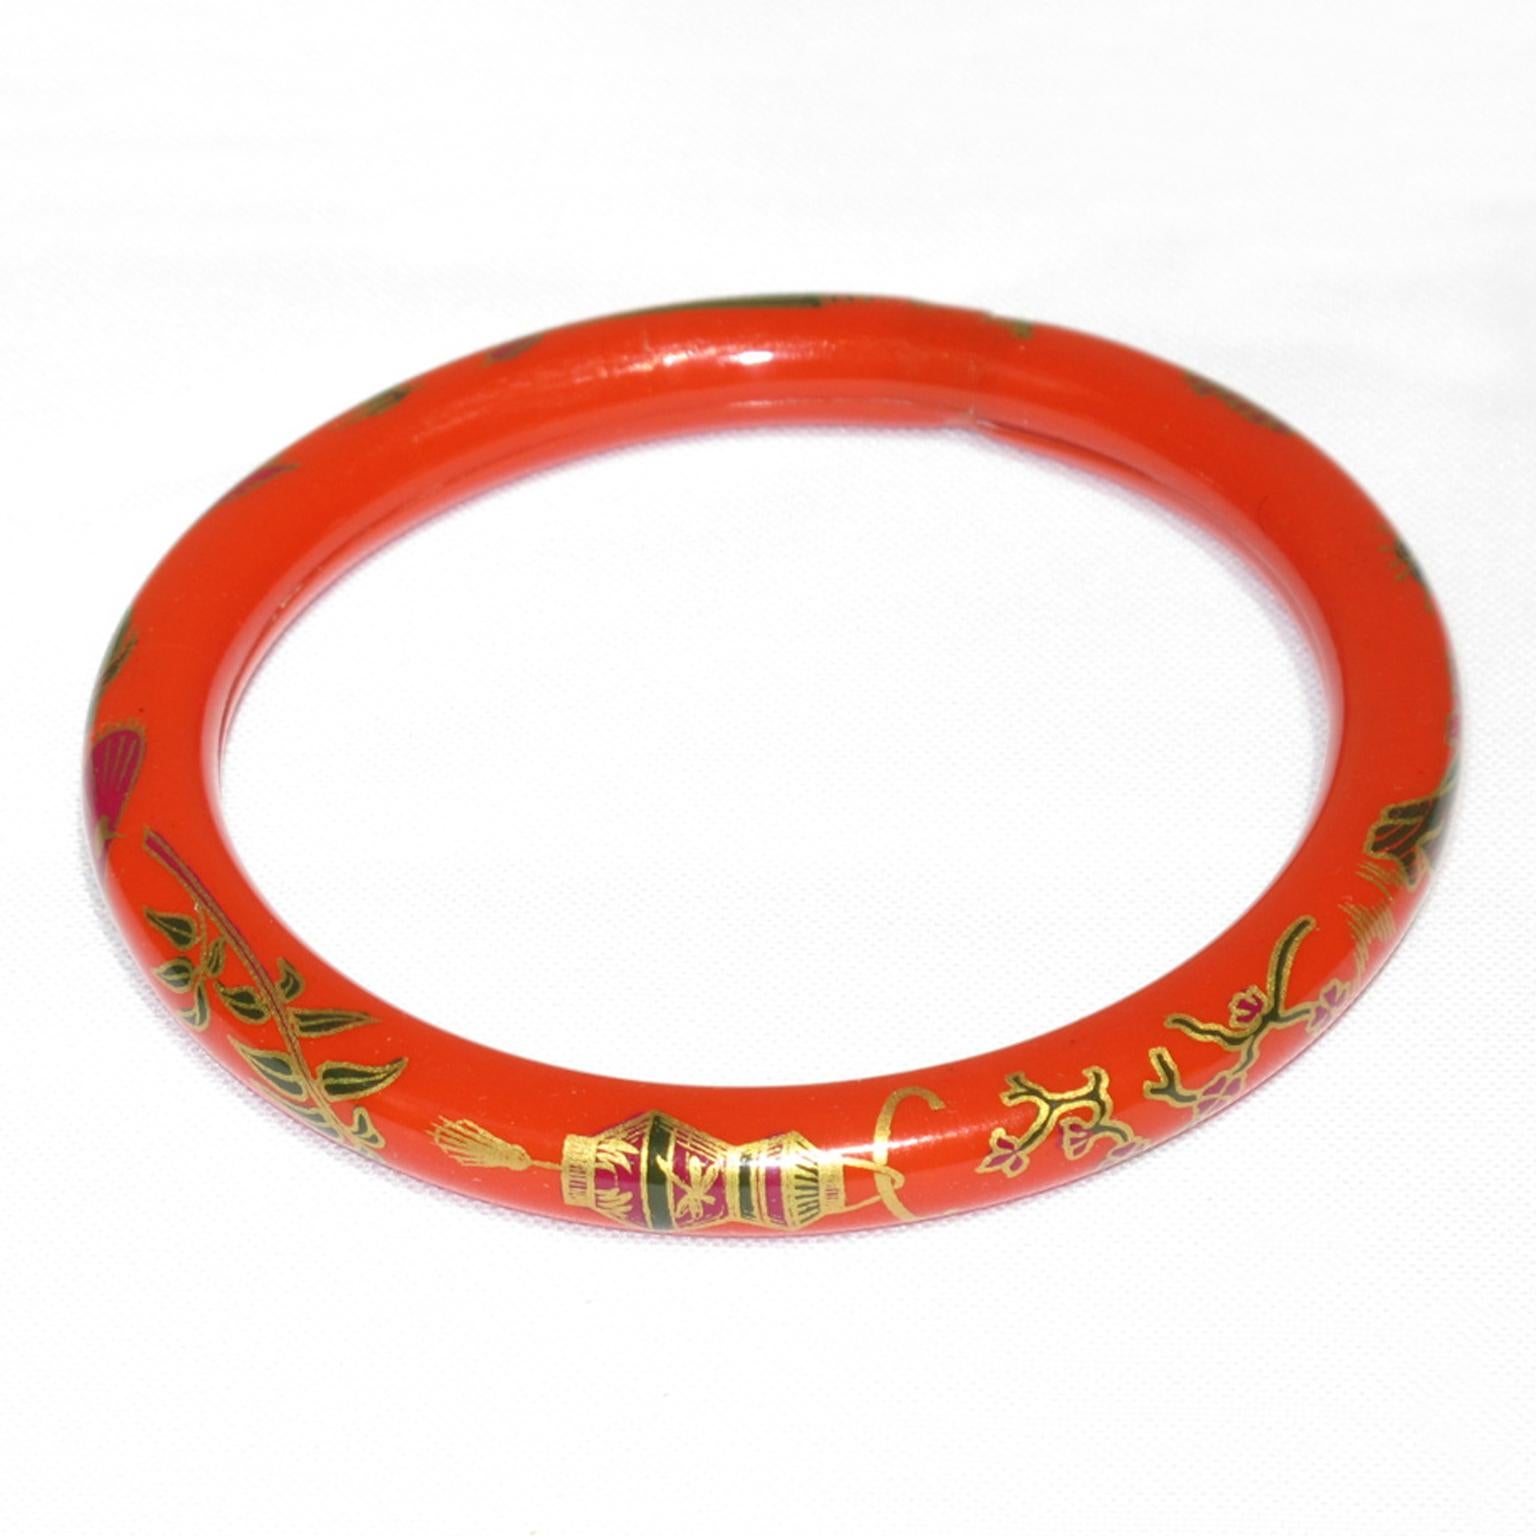 A lovely 1920s French Art Deco celluloid bracelet bangle. It features a light hollow tube shape with an Asian-inspired Japanese design around the bracelet. 
The hollow bracelet technique is an ancient technique applied to jewelry at the turn of the